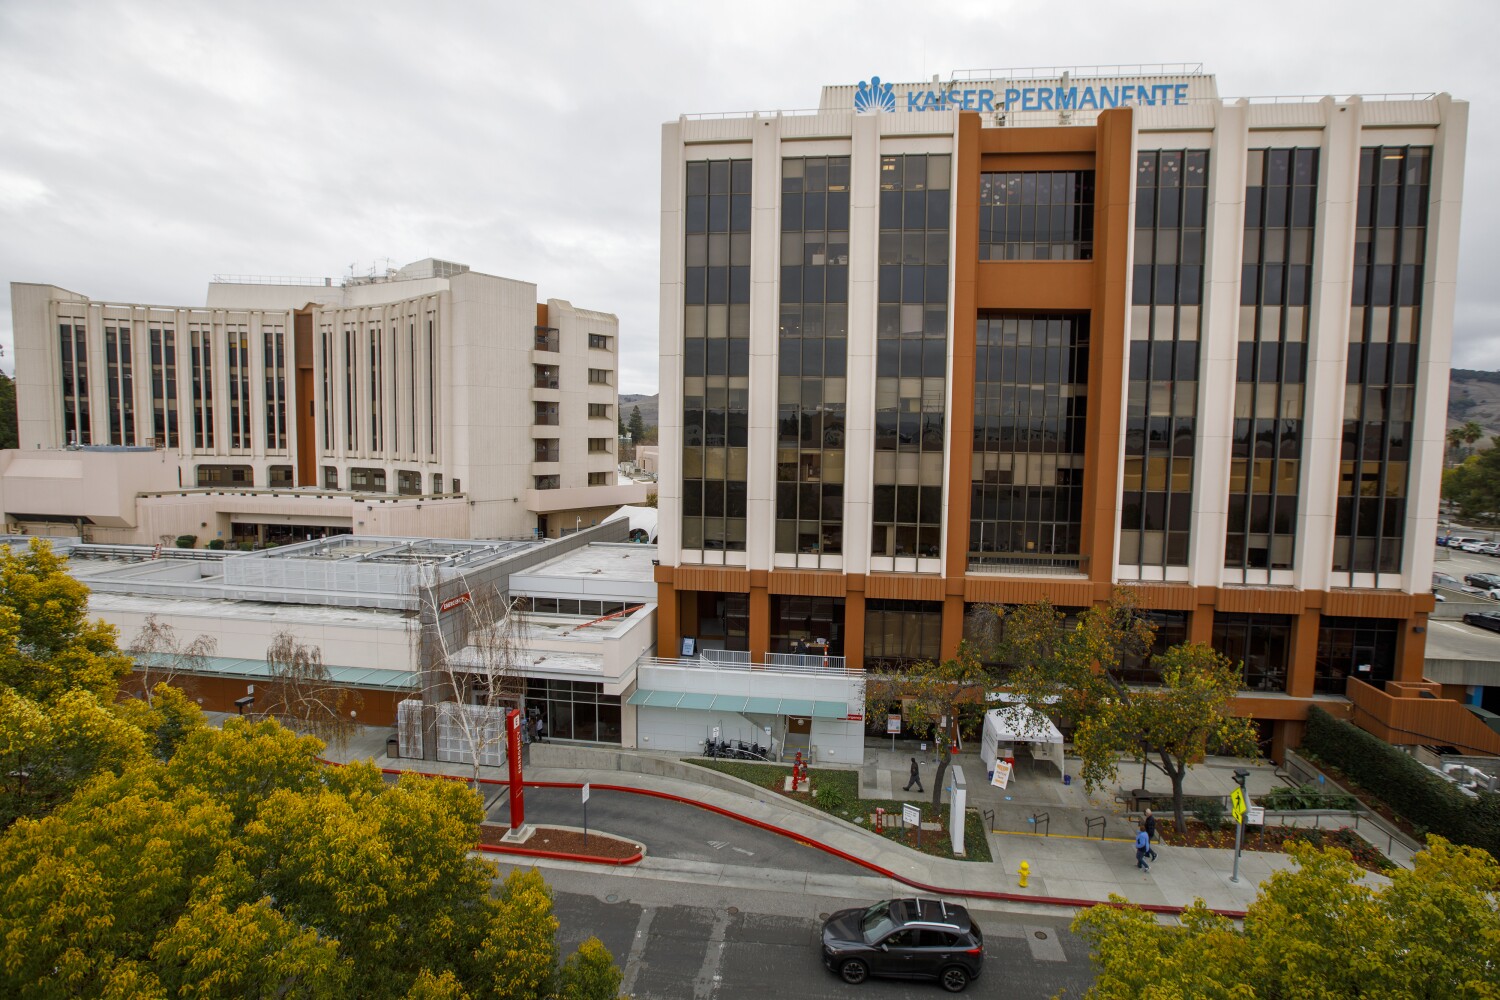 Kaiser Permanente cancels vaccine appointments for more than 5,000 seniors in Silicon Valley